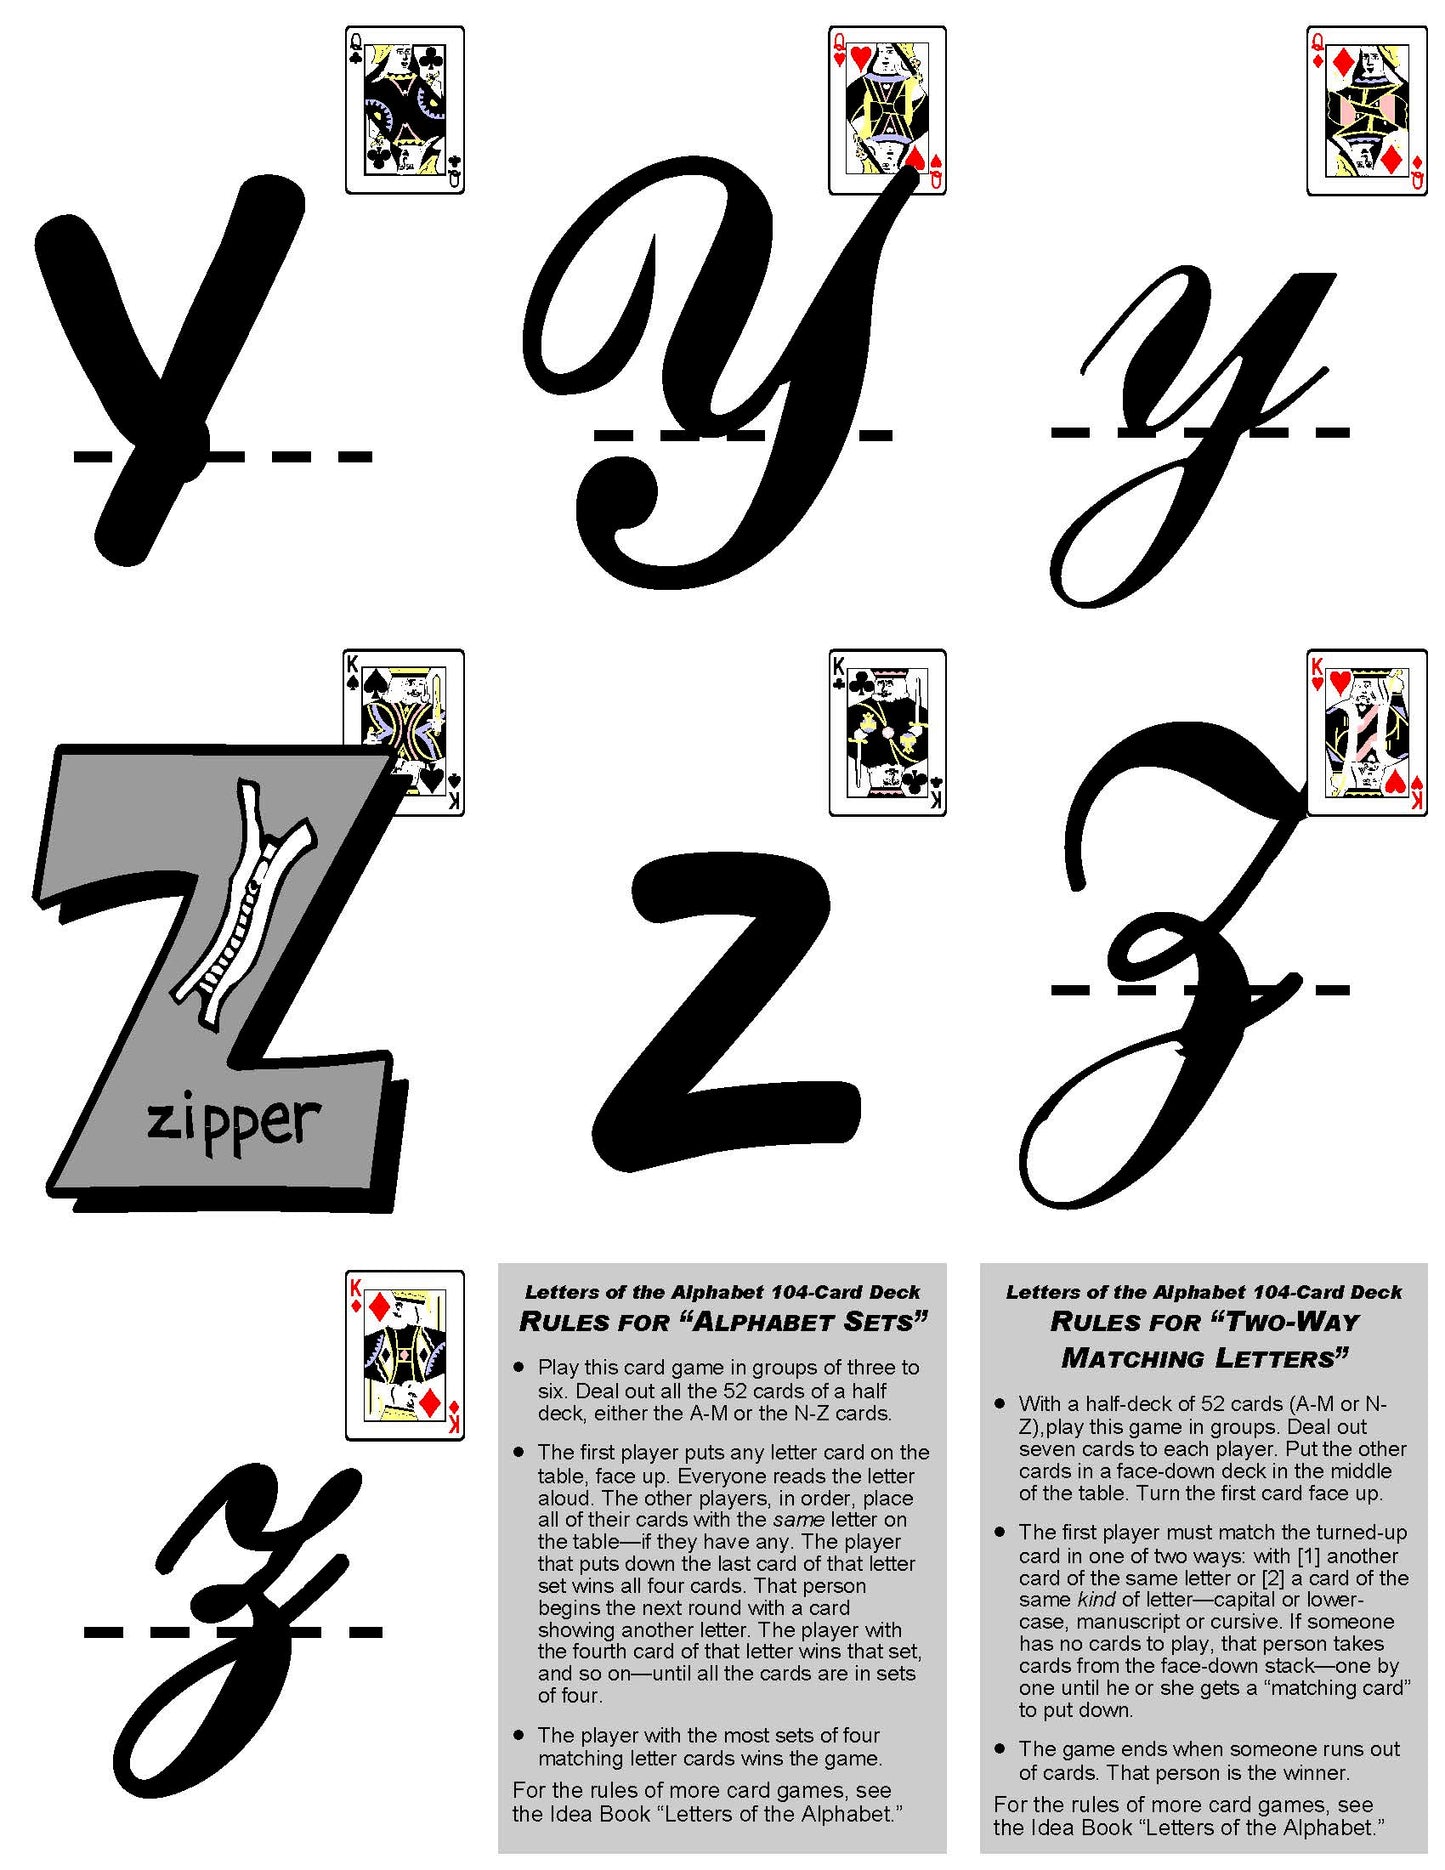 A-07.07: Use Alphabet-Letter Cards AaAa to ZzZz, Version 5, in Learning Activities & Games